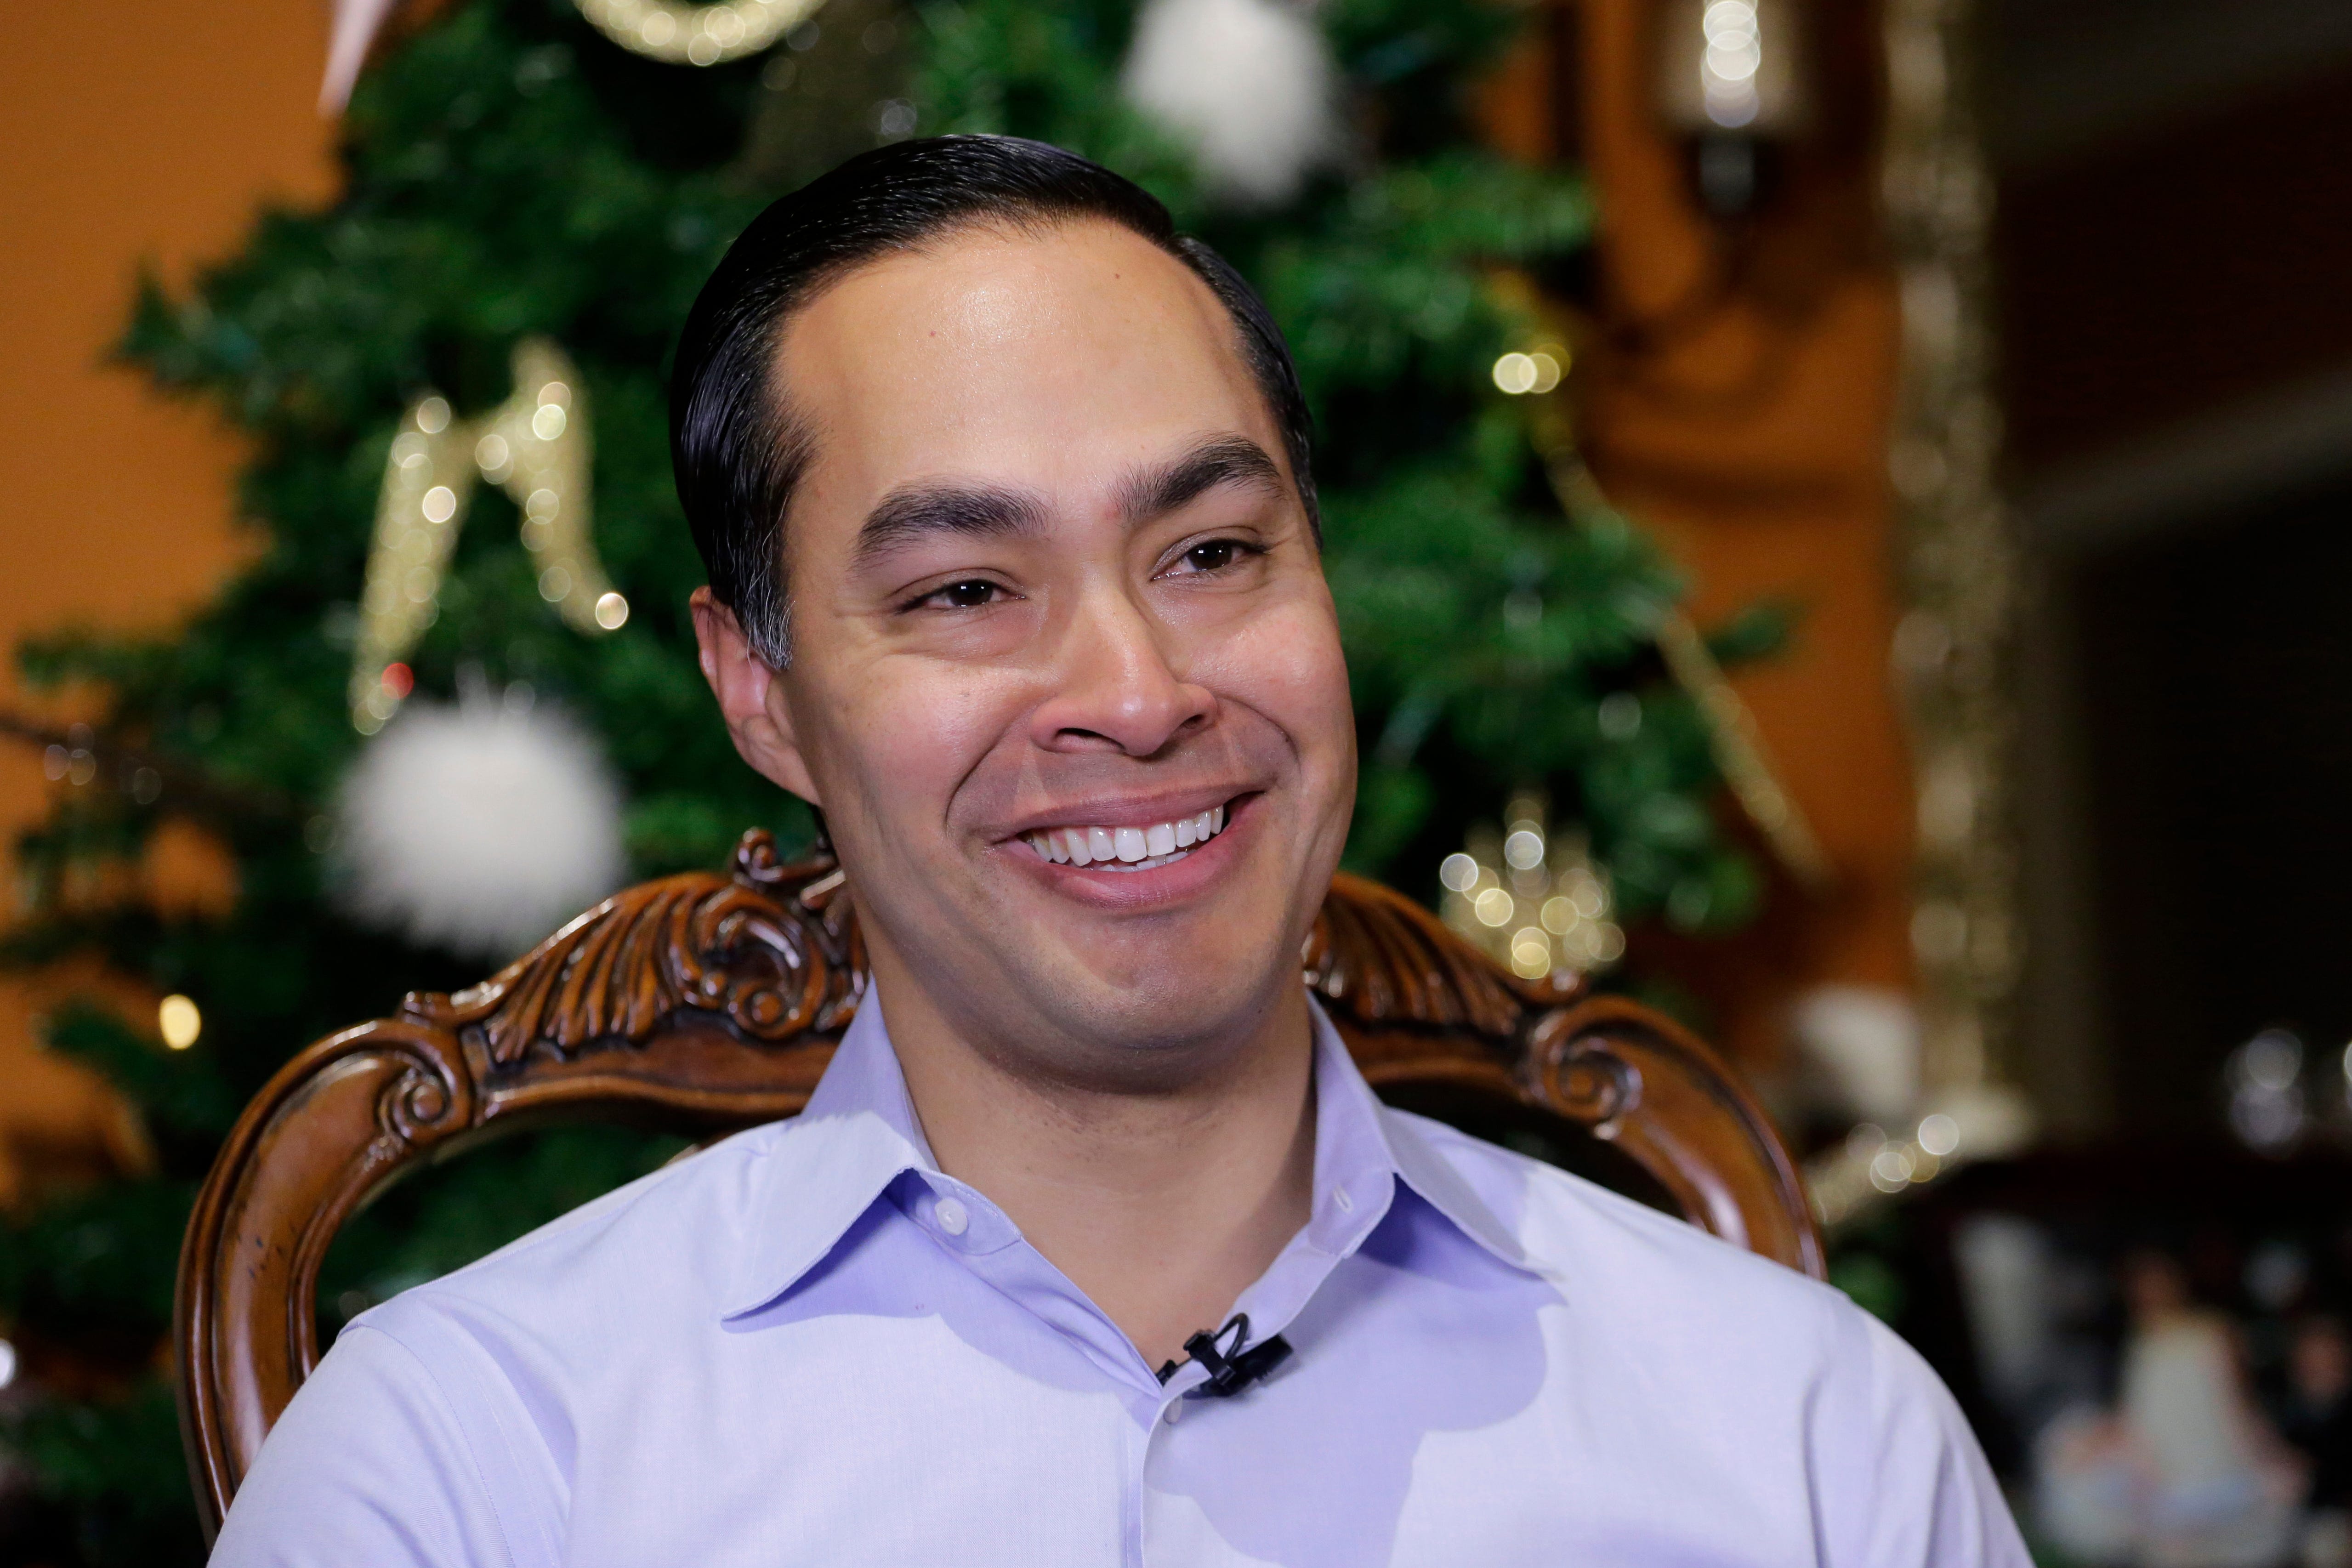 Julian Castro moves to run for president in 2020, trails Beto badly in MoveOn wishlist